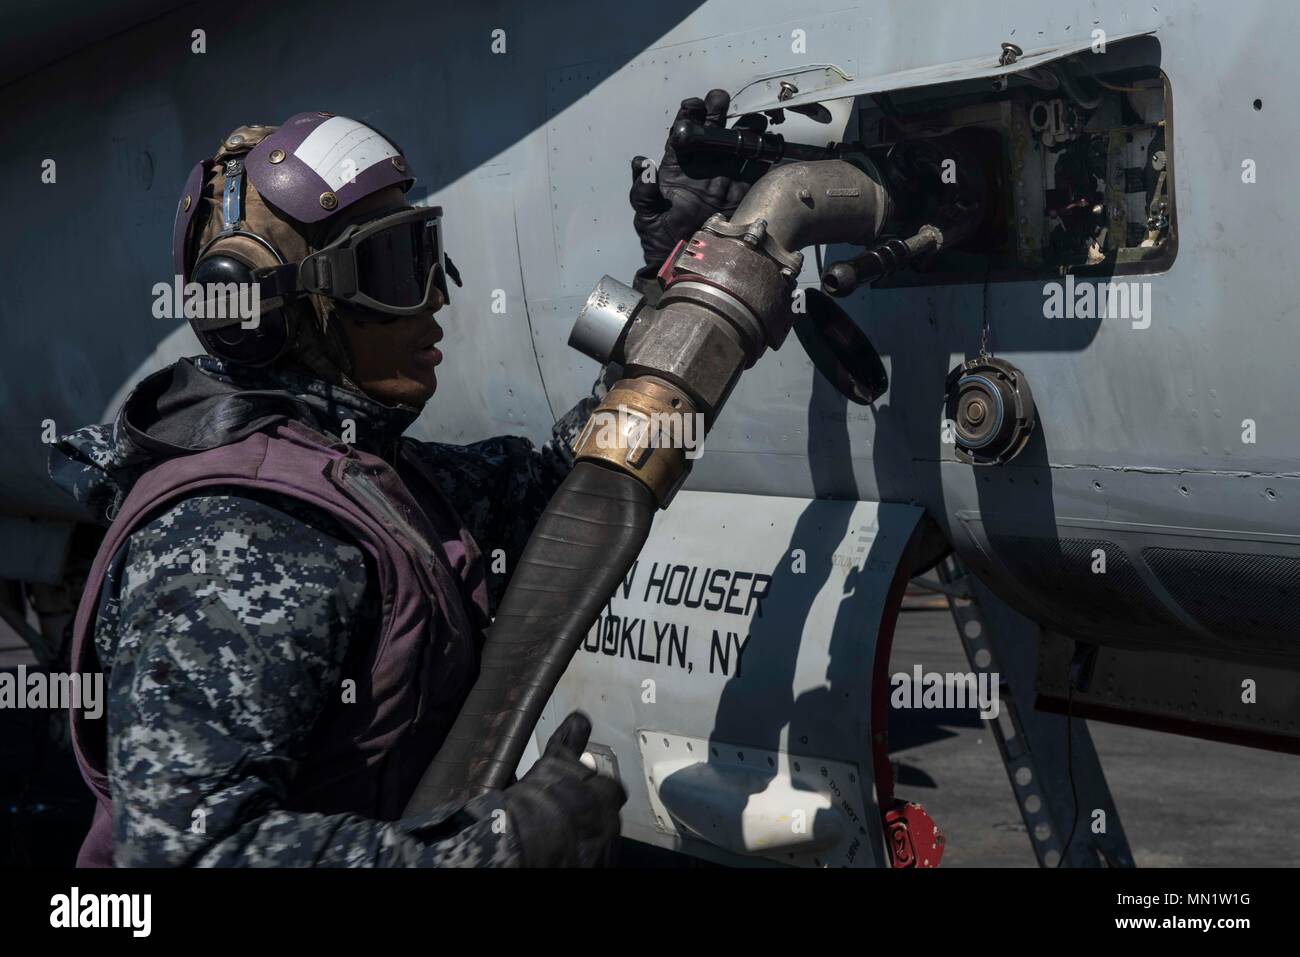 170808-N-AJ467-200 ATLANTIC OCEAN (Aug. 8, 2017) Aviation Boatswain’s Mate (Fuels) Airman Dean Cox refuels an aircraft after flight operations on the flight deck of the Nimitz-class aircraft carrier USS George H.W. Bush (CVN 77) during exercise Saxon Warrior 2017, Aug. 8. Saxon Warrior is a United States and United Kingdom co-hosted carrier strike group exercise that demonstrates interoperability and capability to respond to crises and deter potential threats. (U.S. Navy photo by Mass Communication Specialist Seaman Darien Weigel/Released) Stock Photo